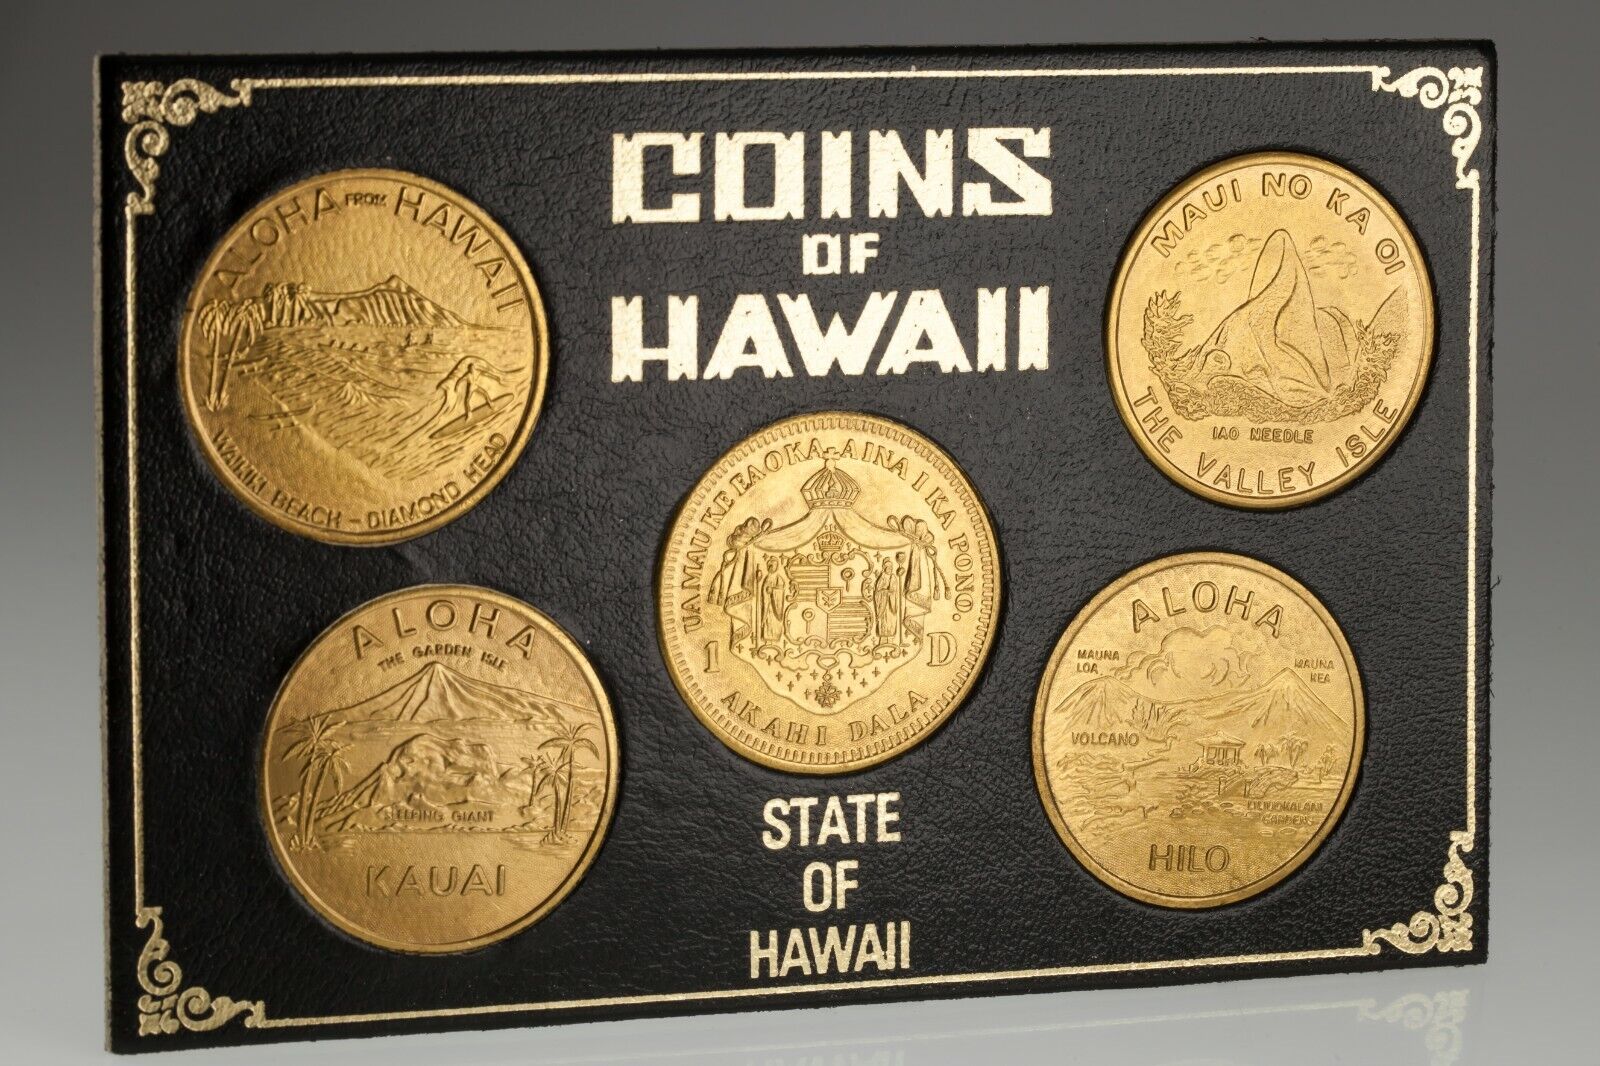 Kingdom of Hawaii coins in Rainbow Falls Collection at ANA